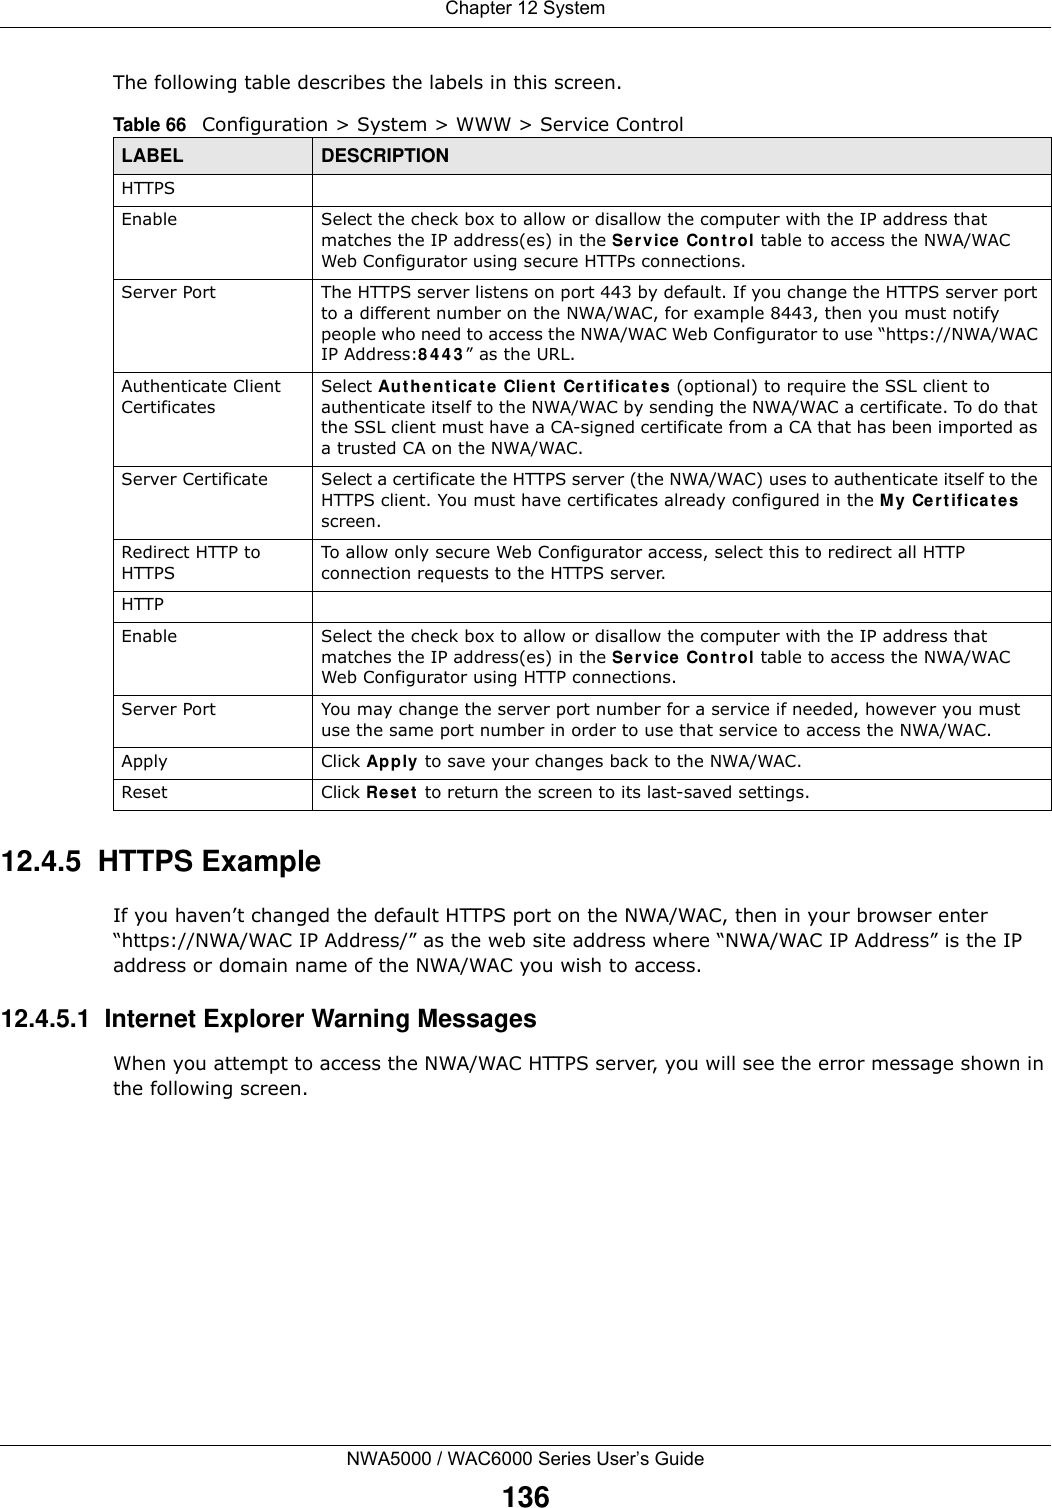 Chapter 12 SystemNWA5000 / WAC6000 Series User’s Guide136The following table describes the labels in this screen.  12.4.5  HTTPS ExampleIf you haven’t changed the default HTTPS port on the NWA/WAC, then in your browser enter “https://NWA/WAC IP Address/” as the web site address where “NWA/WAC IP Address” is the IP address or domain name of the NWA/WAC you wish to access.12.4.5.1  Internet Explorer Warning MessagesWhen you attempt to access the NWA/WAC HTTPS server, you will see the error message shown in the following screen.Table 66   Configuration &gt; System &gt; WWW &gt; Service ControlLABEL DESCRIPTIONHTTPSEnable Select the check box to allow or disallow the computer with the IP address that matches the IP address(es) in the Service Cont rol table to access the NWA/WAC Web Configurator using secure HTTPs connections.Server Port The HTTPS server listens on port 443 by default. If you change the HTTPS server port to a different number on the NWA/WAC, for example 8443, then you must notify people who need to access the NWA/WAC Web Configurator to use “https://NWA/WAC IP Address:8 4 4 3 ” as the URL.Authenticate Client CertificatesSelect Aut h e n t ica t e Client Ce r t ificat e s (optional) to require the SSL client to authenticate itself to the NWA/WAC by sending the NWA/WAC a certificate. To do that the SSL client must have a CA-signed certificate from a CA that has been imported as a trusted CA on the NWA/WAC.Server Certificate Select a certificate the HTTPS server (the NWA/WAC) uses to authenticate itself to the HTTPS client. You must have certificates already configured in the My Cert ificat e s screen.Redirect HTTP to HTTPS To allow only secure Web Configurator access, select this to redirect all HTTP connection requests to the HTTPS server.HTTPEnable Select the check box to allow or disallow the computer with the IP address that matches the IP address(es) in the Service Cont rol table to access the NWA/WAC Web Configurator using HTTP connections.Server Port You may change the server port number for a service if needed, however you must use the same port number in order to use that service to access the NWA/WAC.Apply Click Apply to save your changes back to the NWA/WAC. Reset Click Re se t  to return the screen to its last-saved settings. 